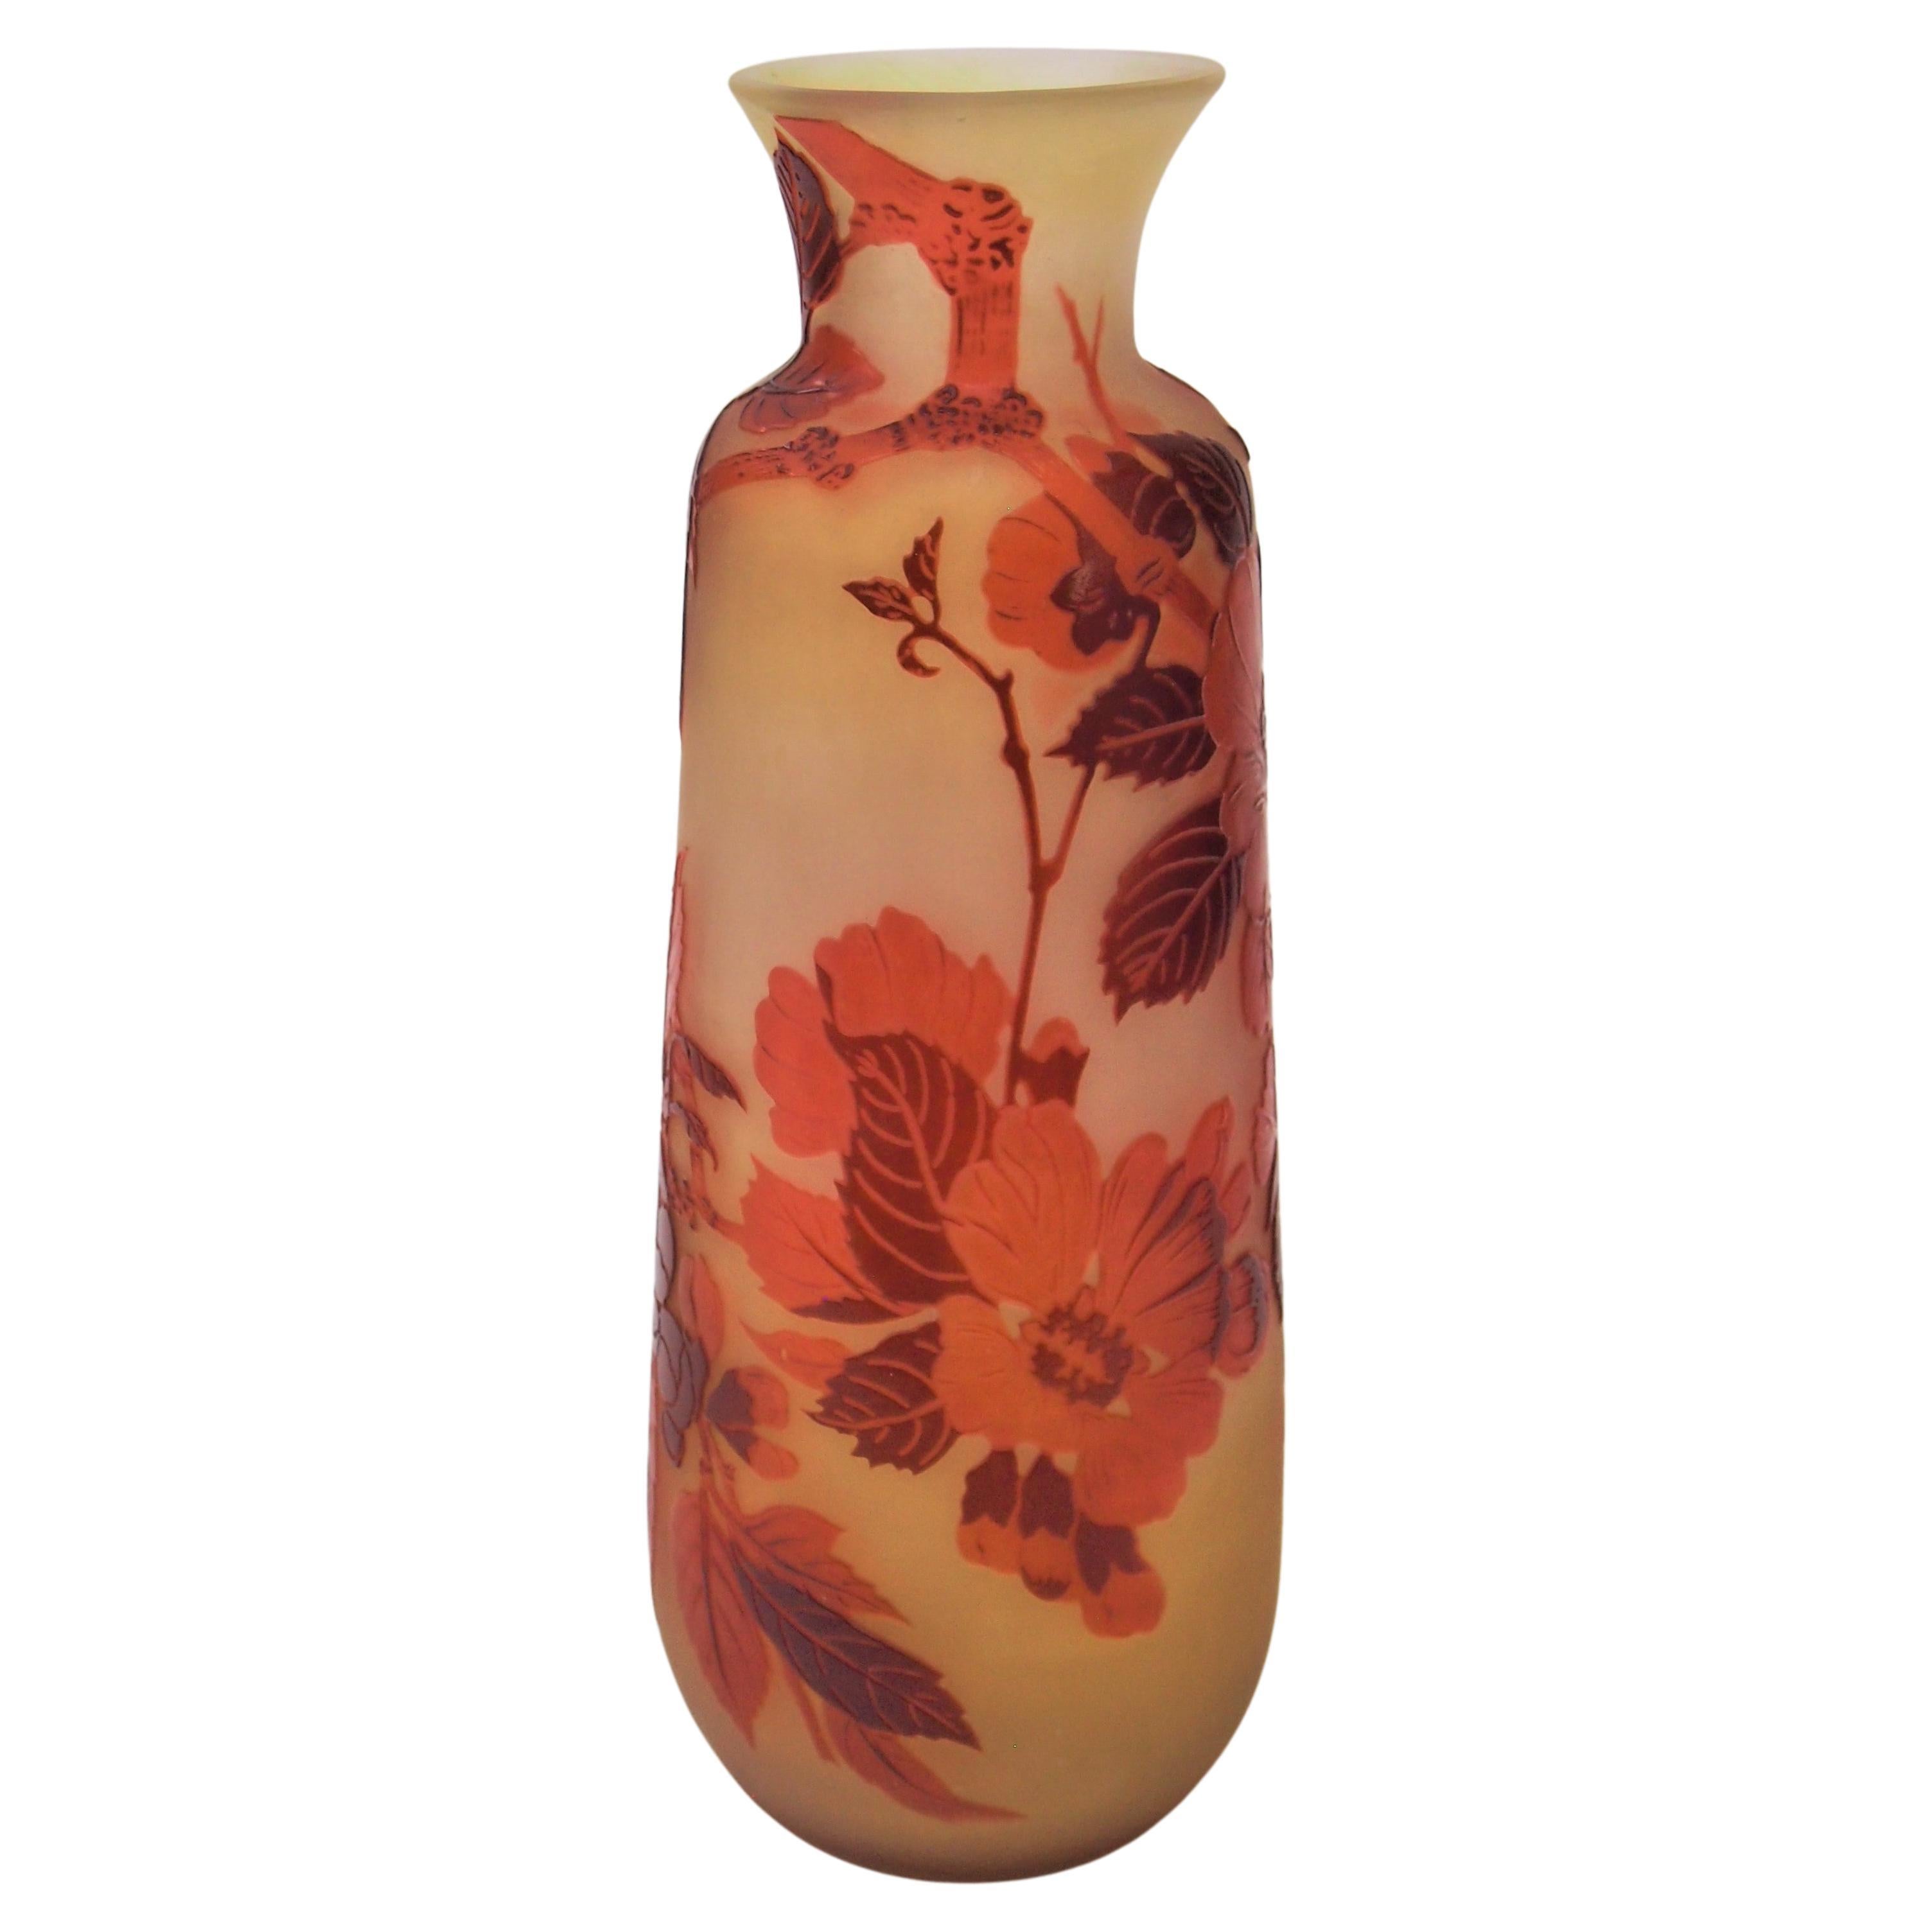 French Art Nouveau Emile Galle Cameo Glass Prunus Blossom Vase, circa 1920 For Sale